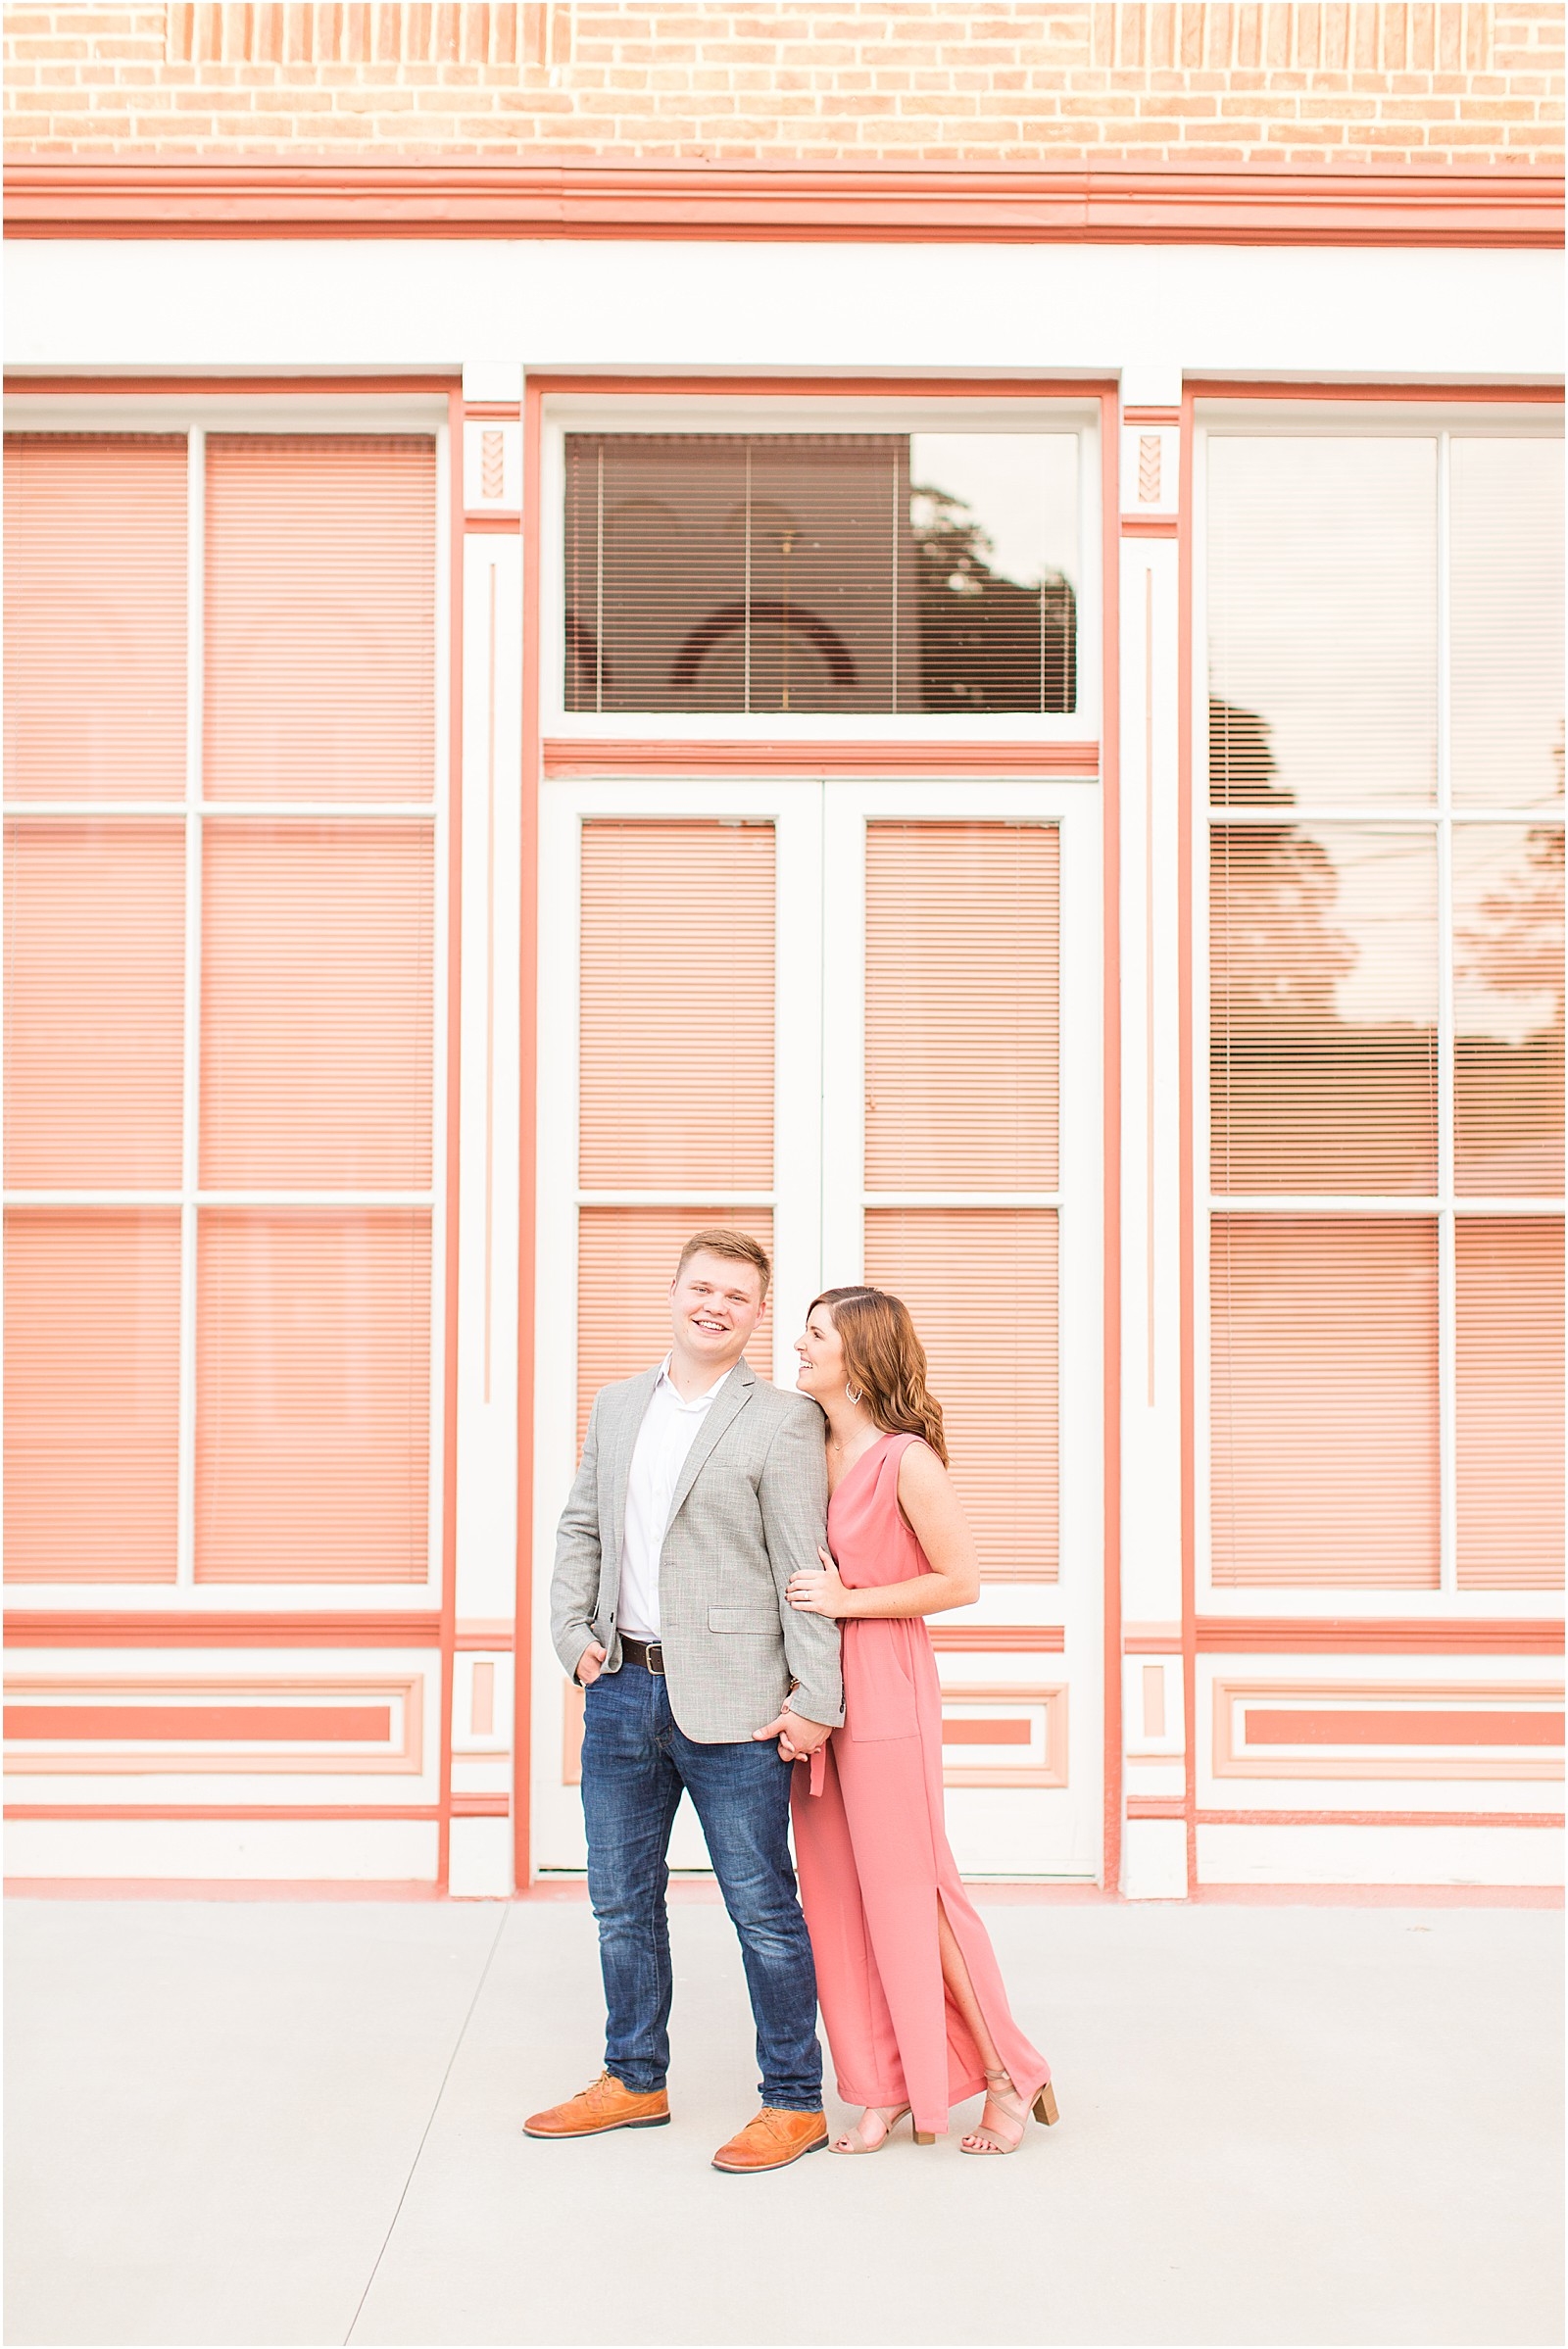 Downtown Huntingburgh Engagement Session | Gabby and Aidan | Bret and Brtandie Photography 013.jpg